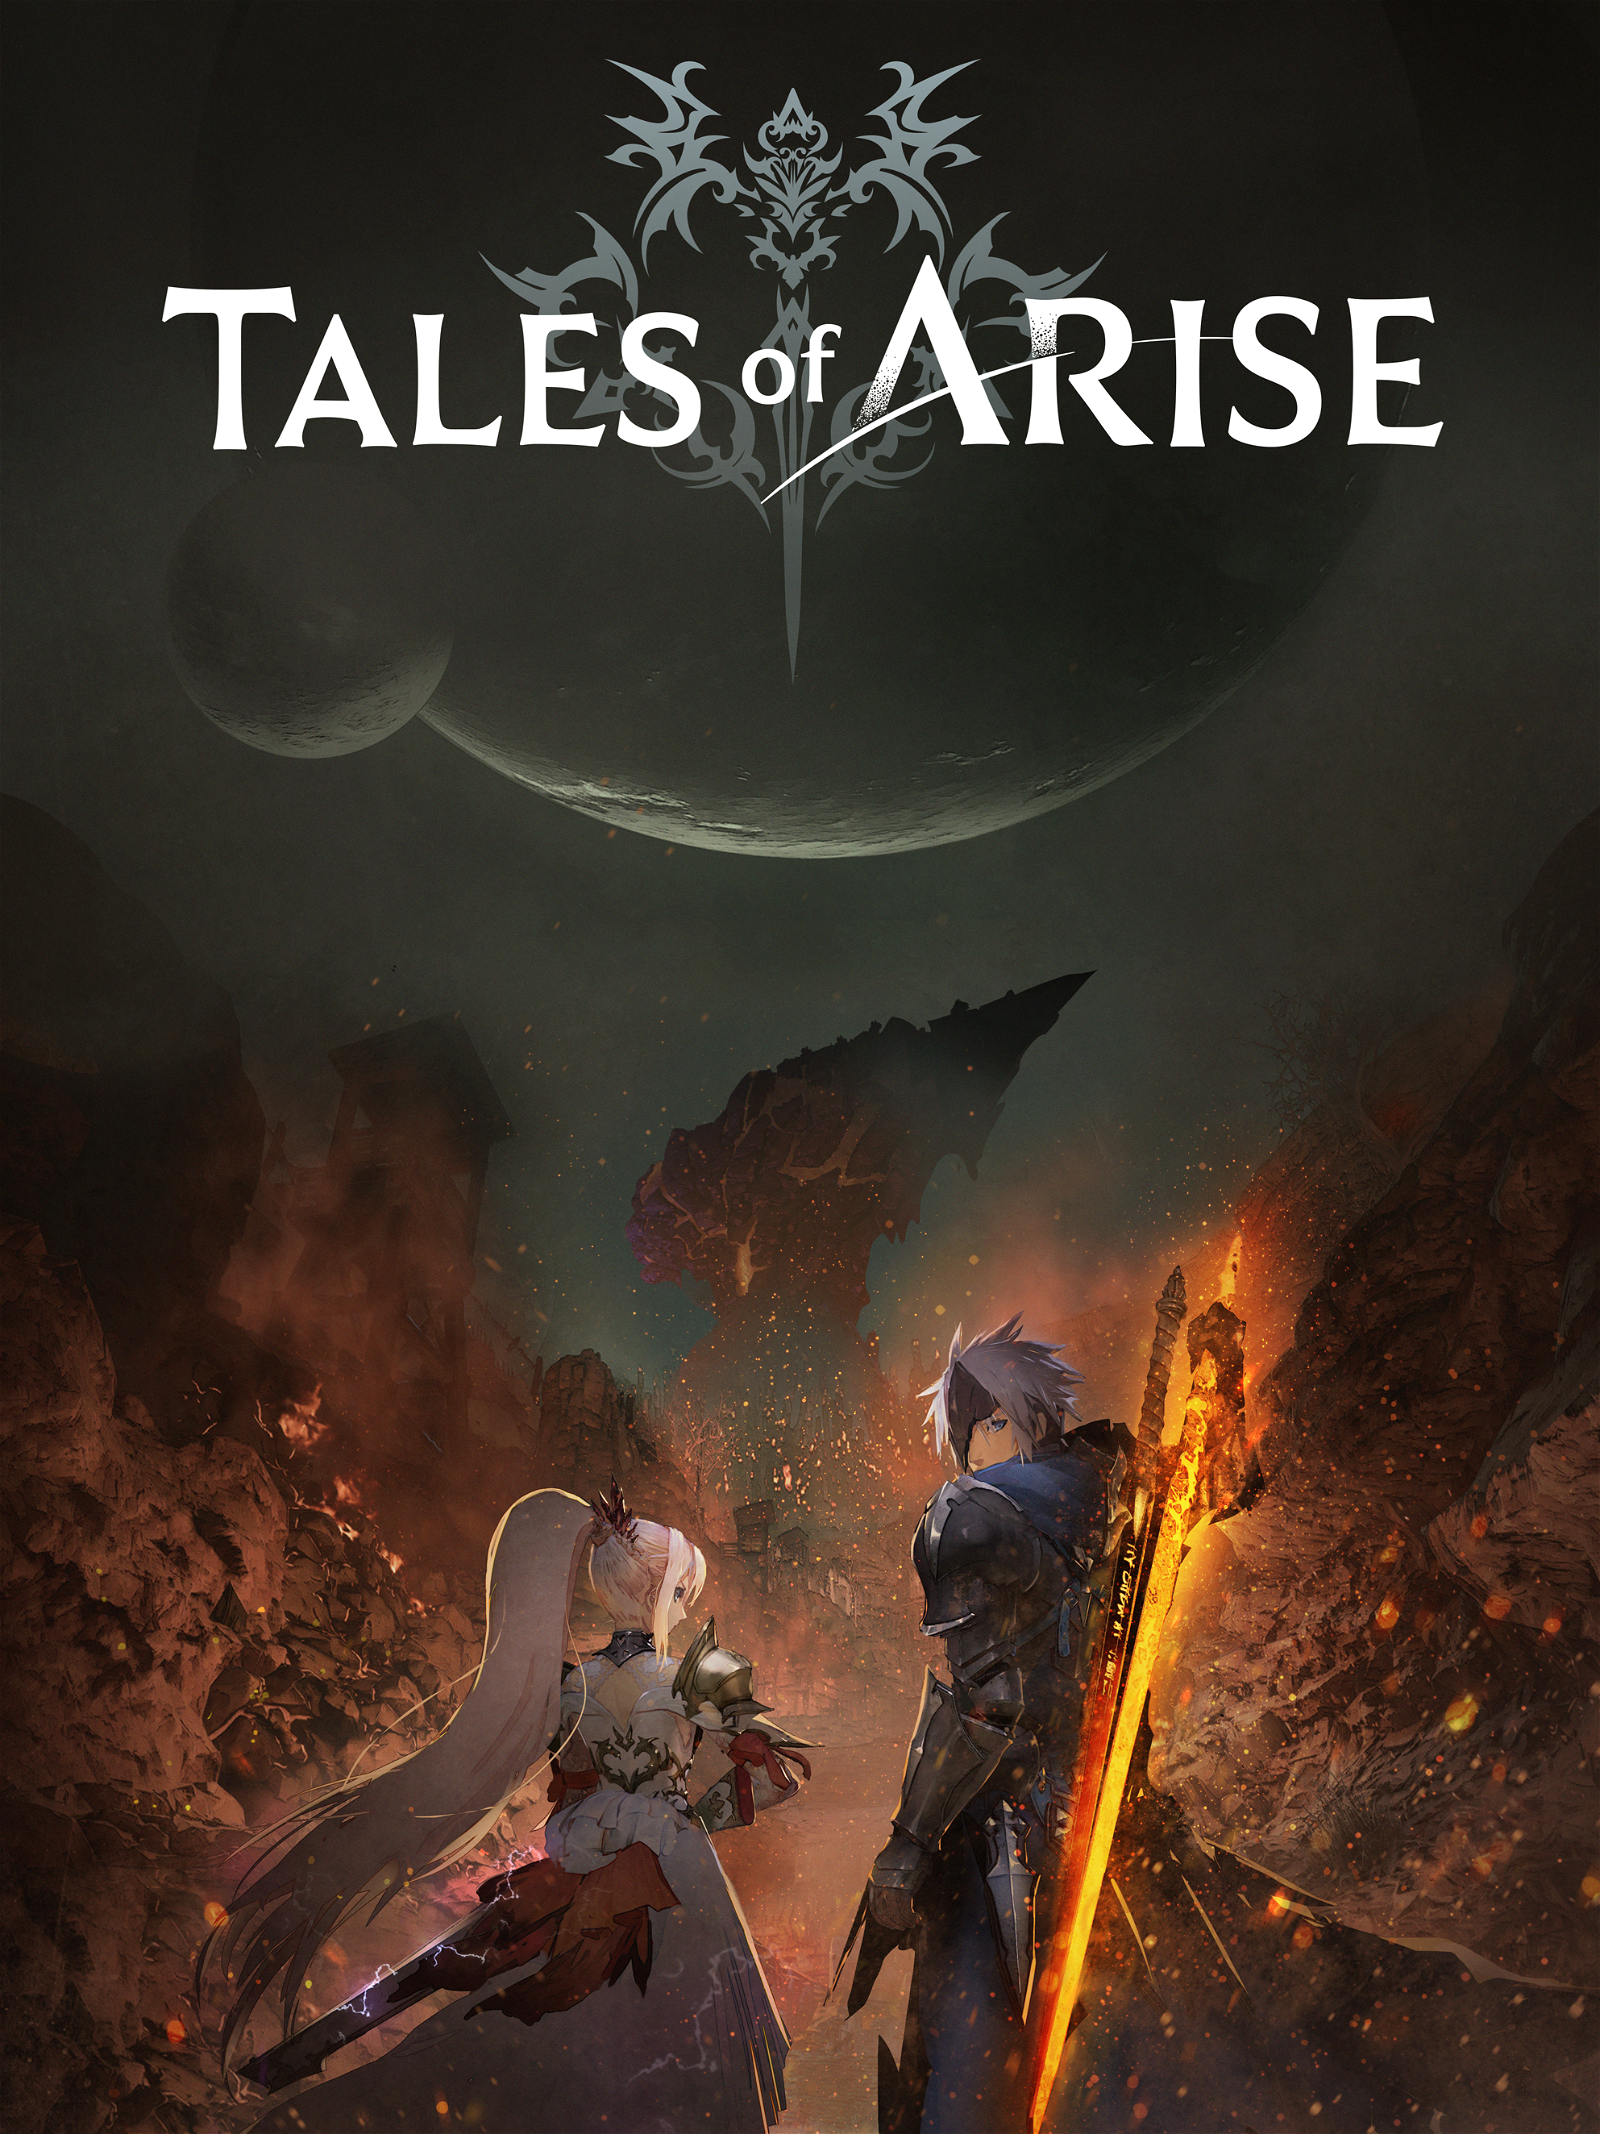 Image of Tales of Arise